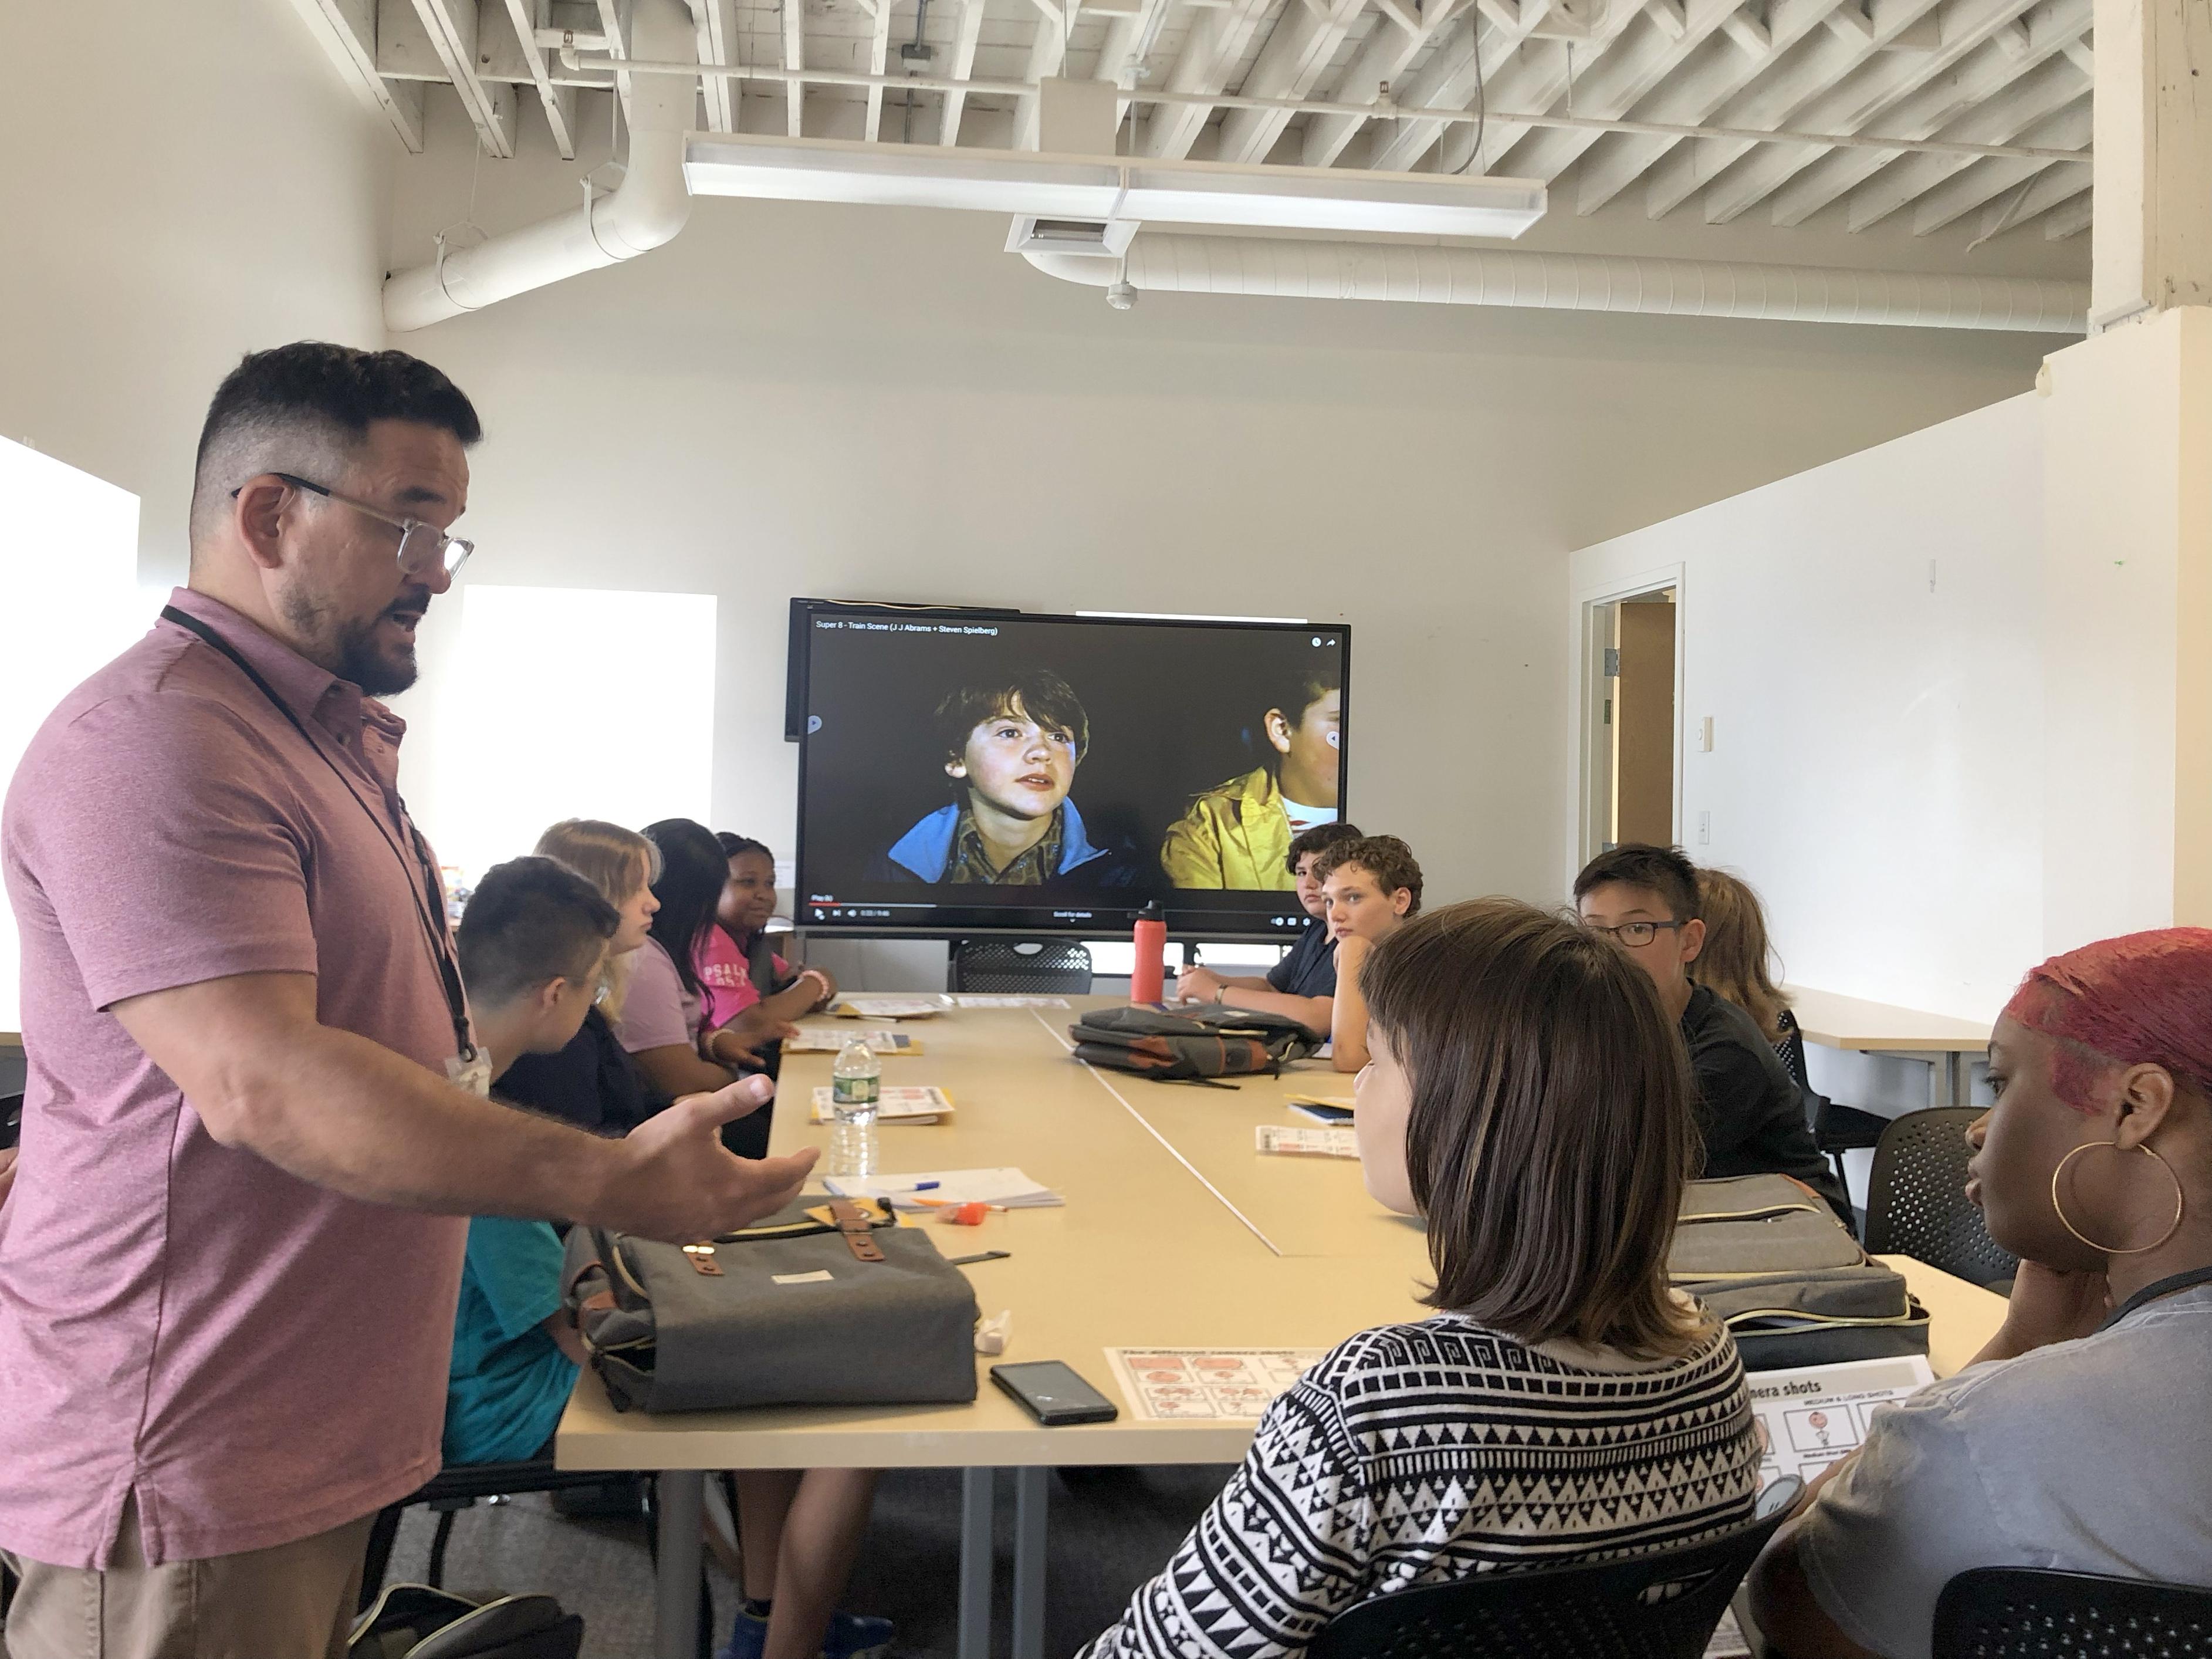 Francisco Suarez leads a summer visual storytelling camp